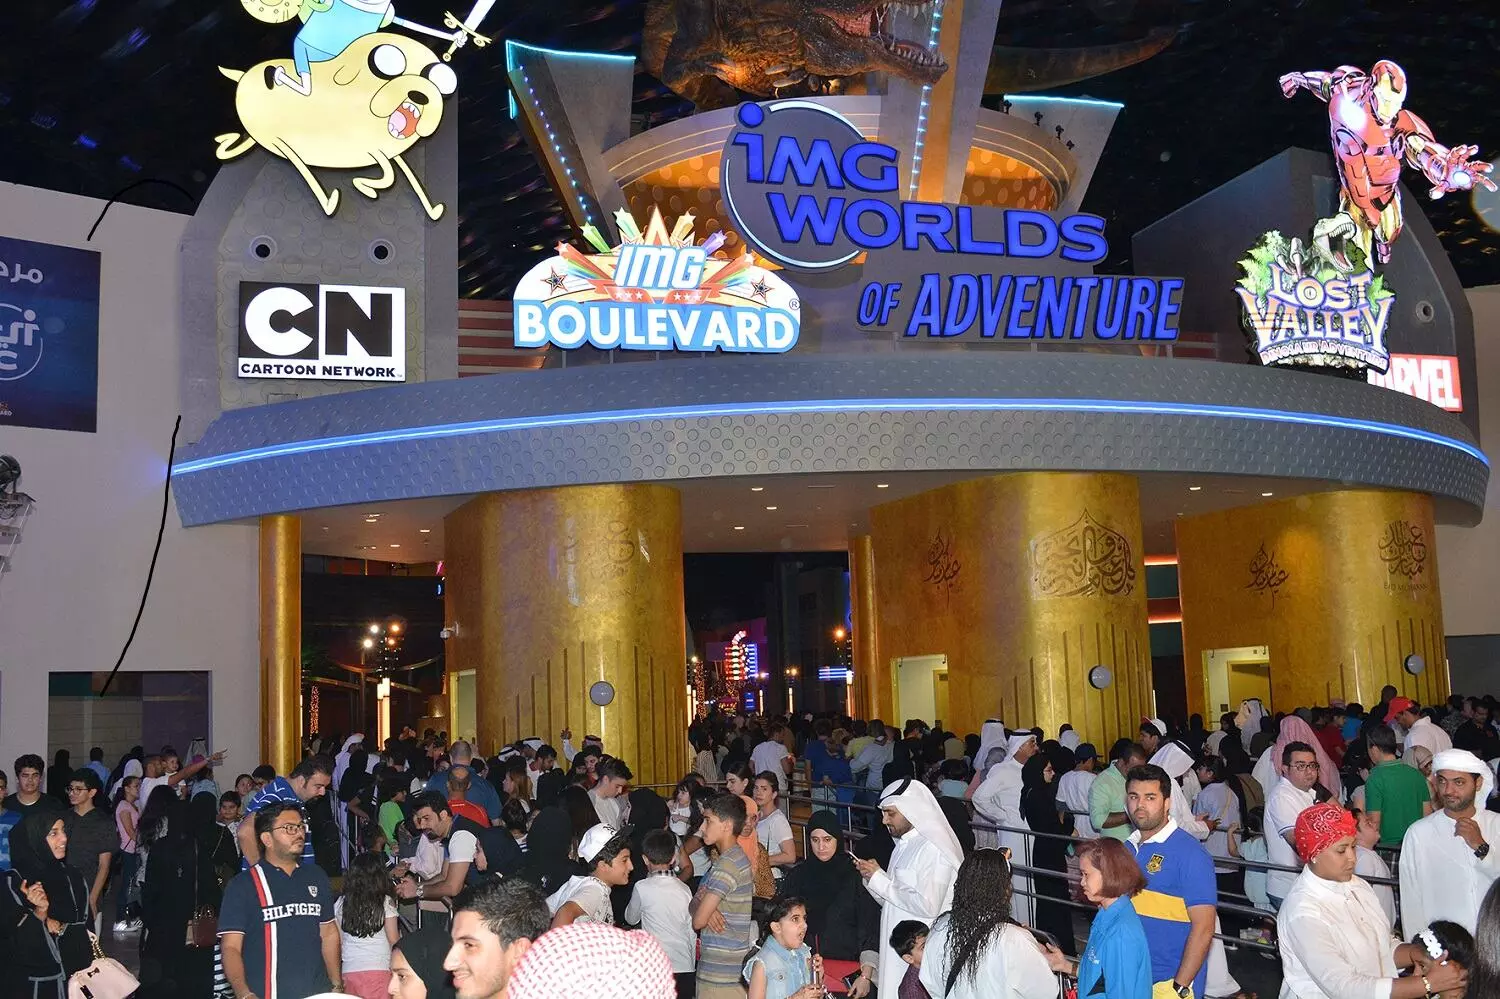 IMG Worlds of Adventure 5th Anniversary celebration begins today!